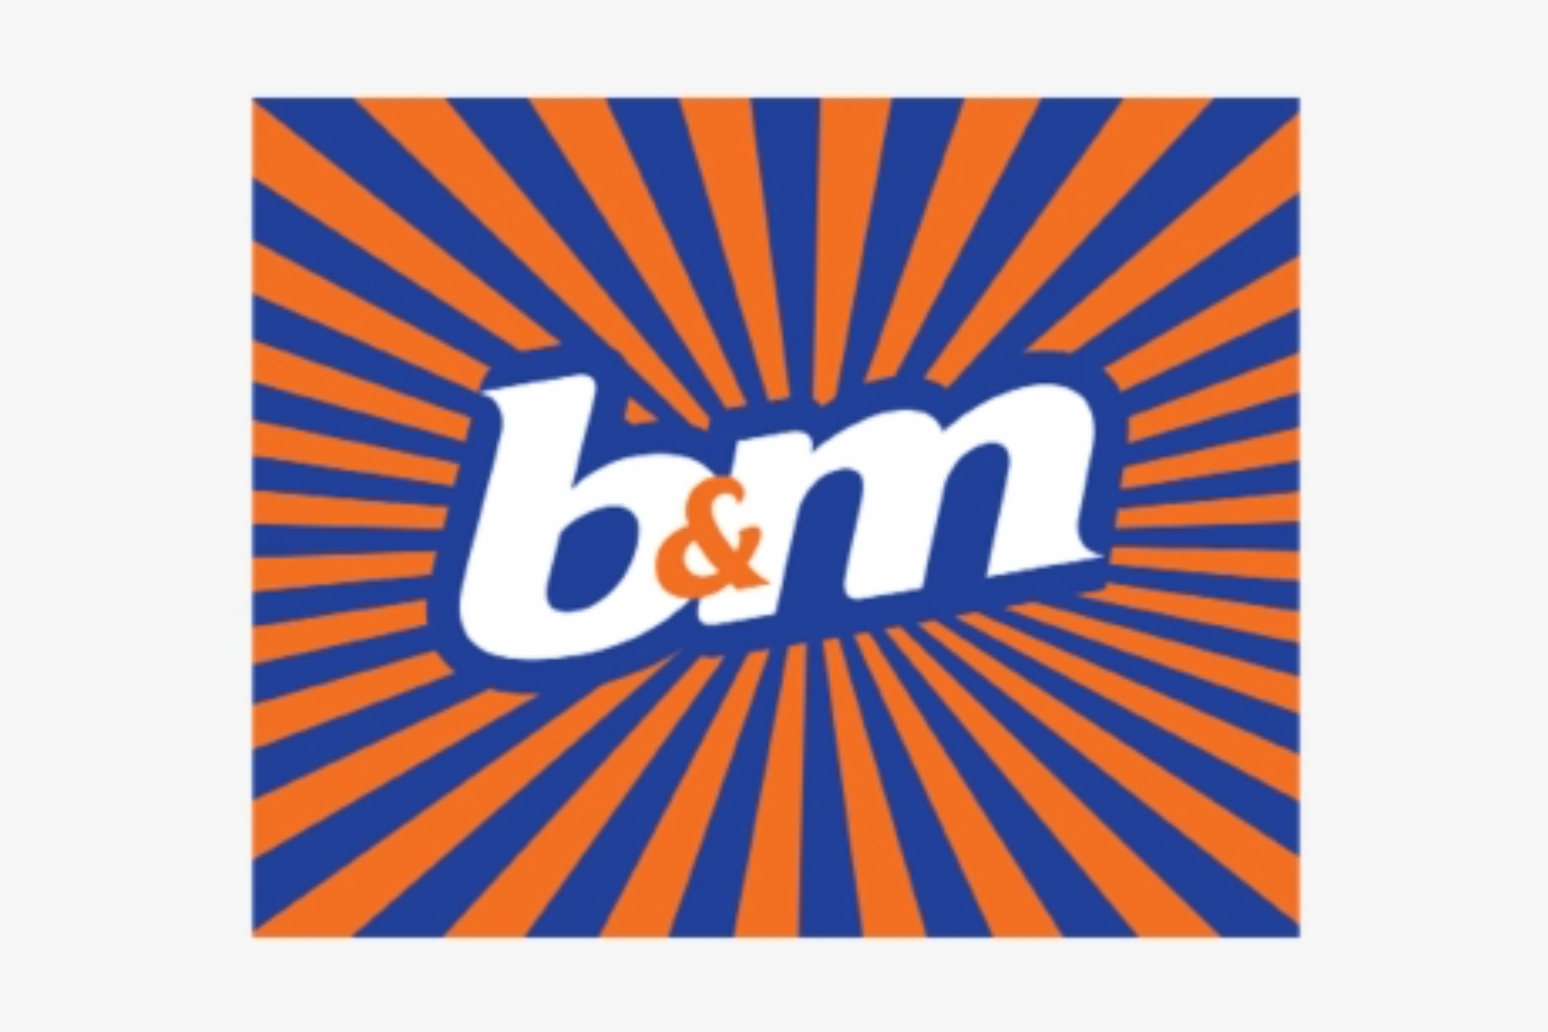 B&M’s billionaire brothers sell £230m stake 